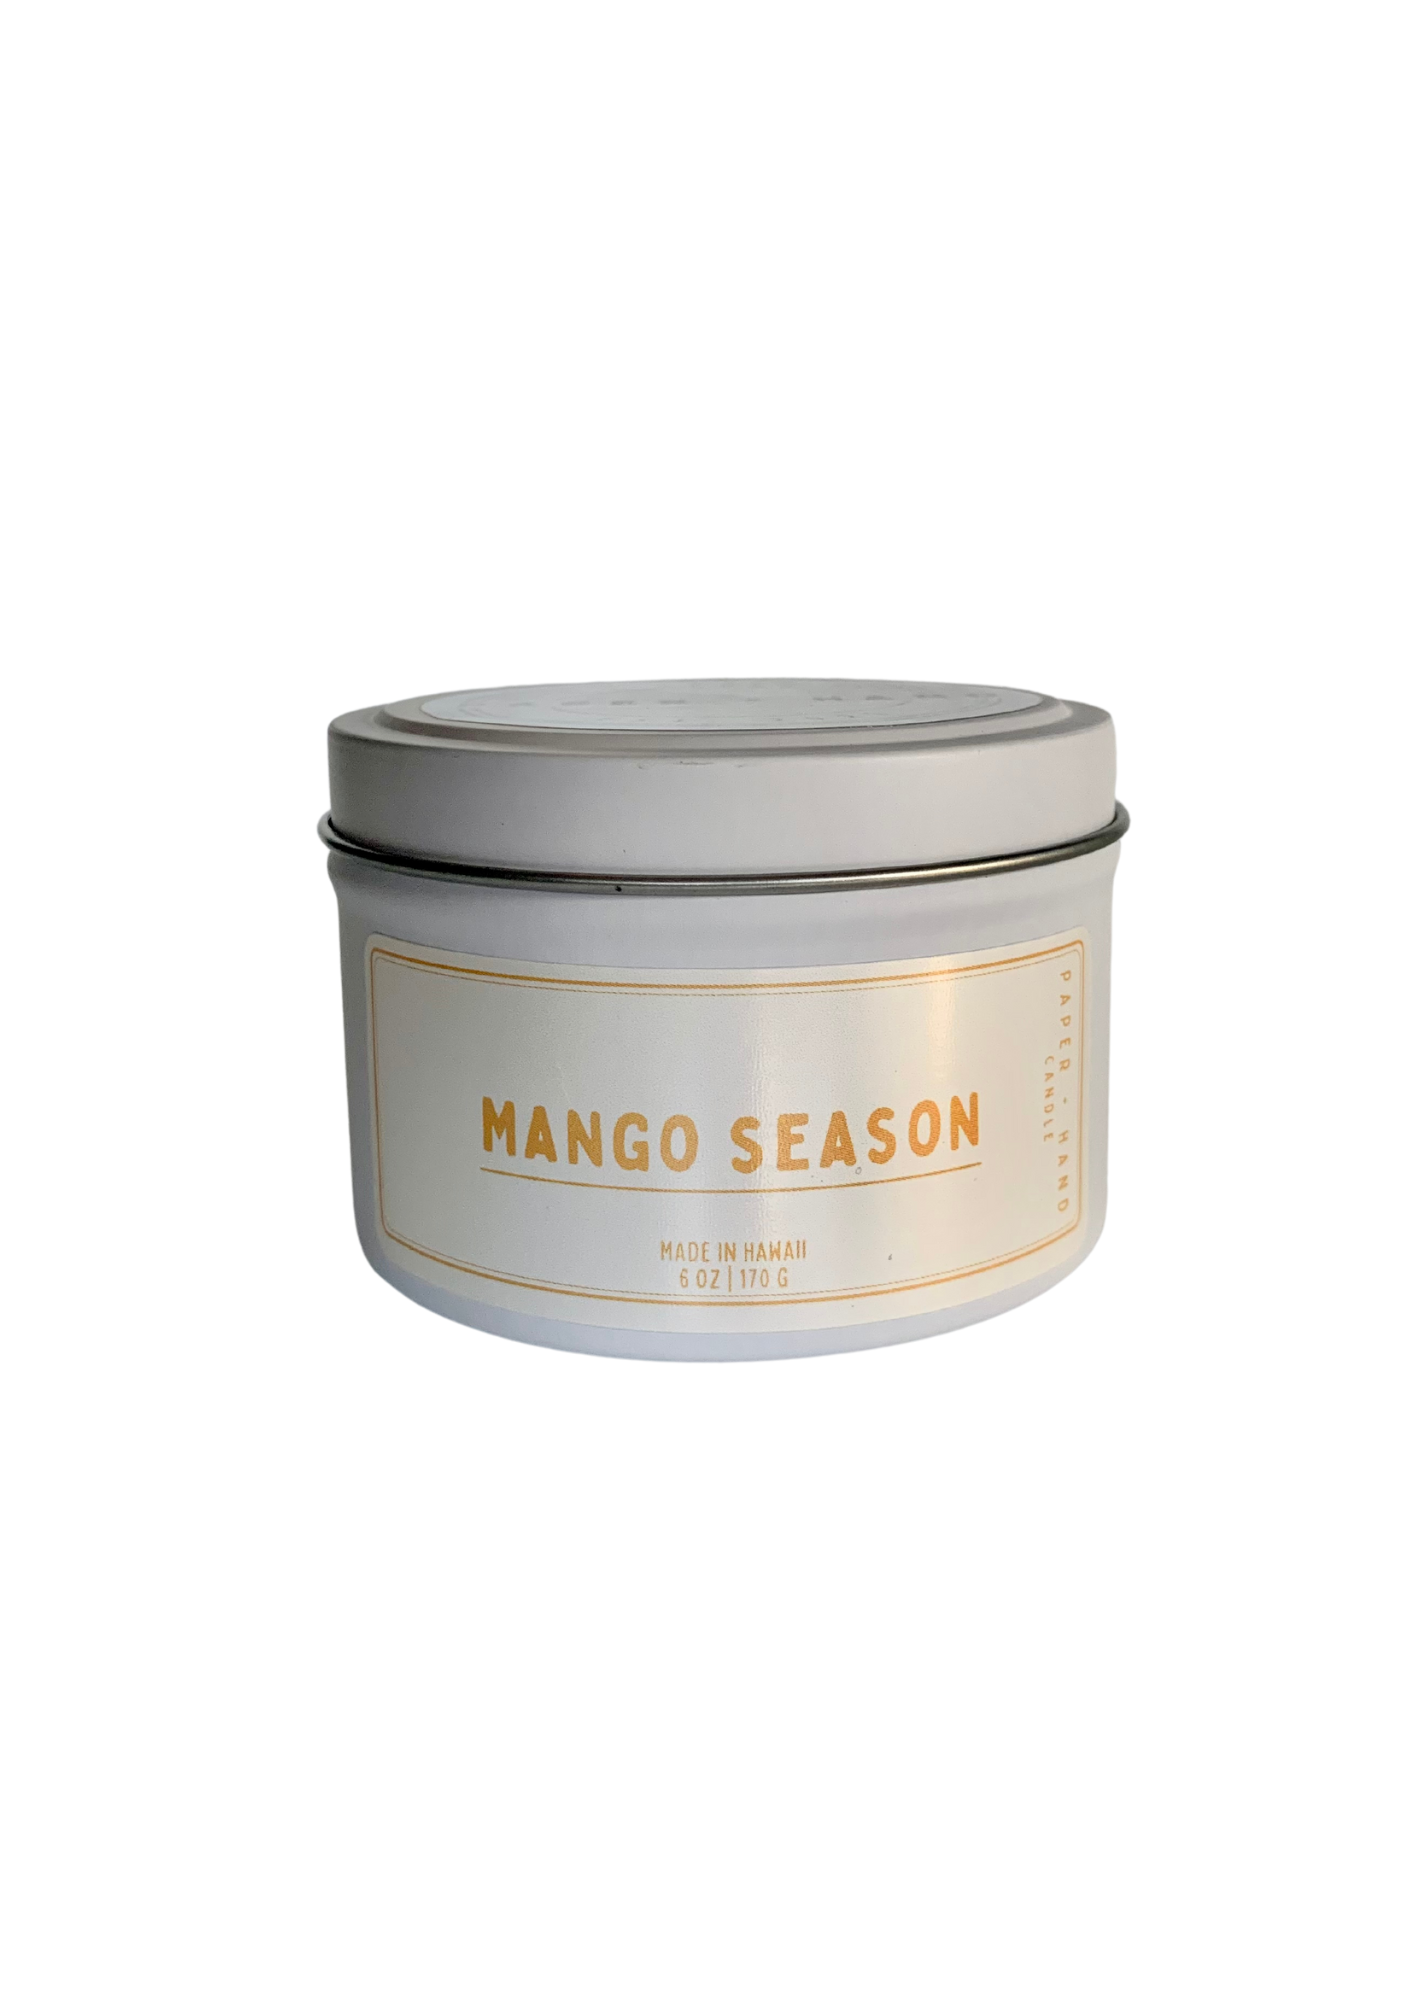 6 oz tin - Scented Soy Wax Candle